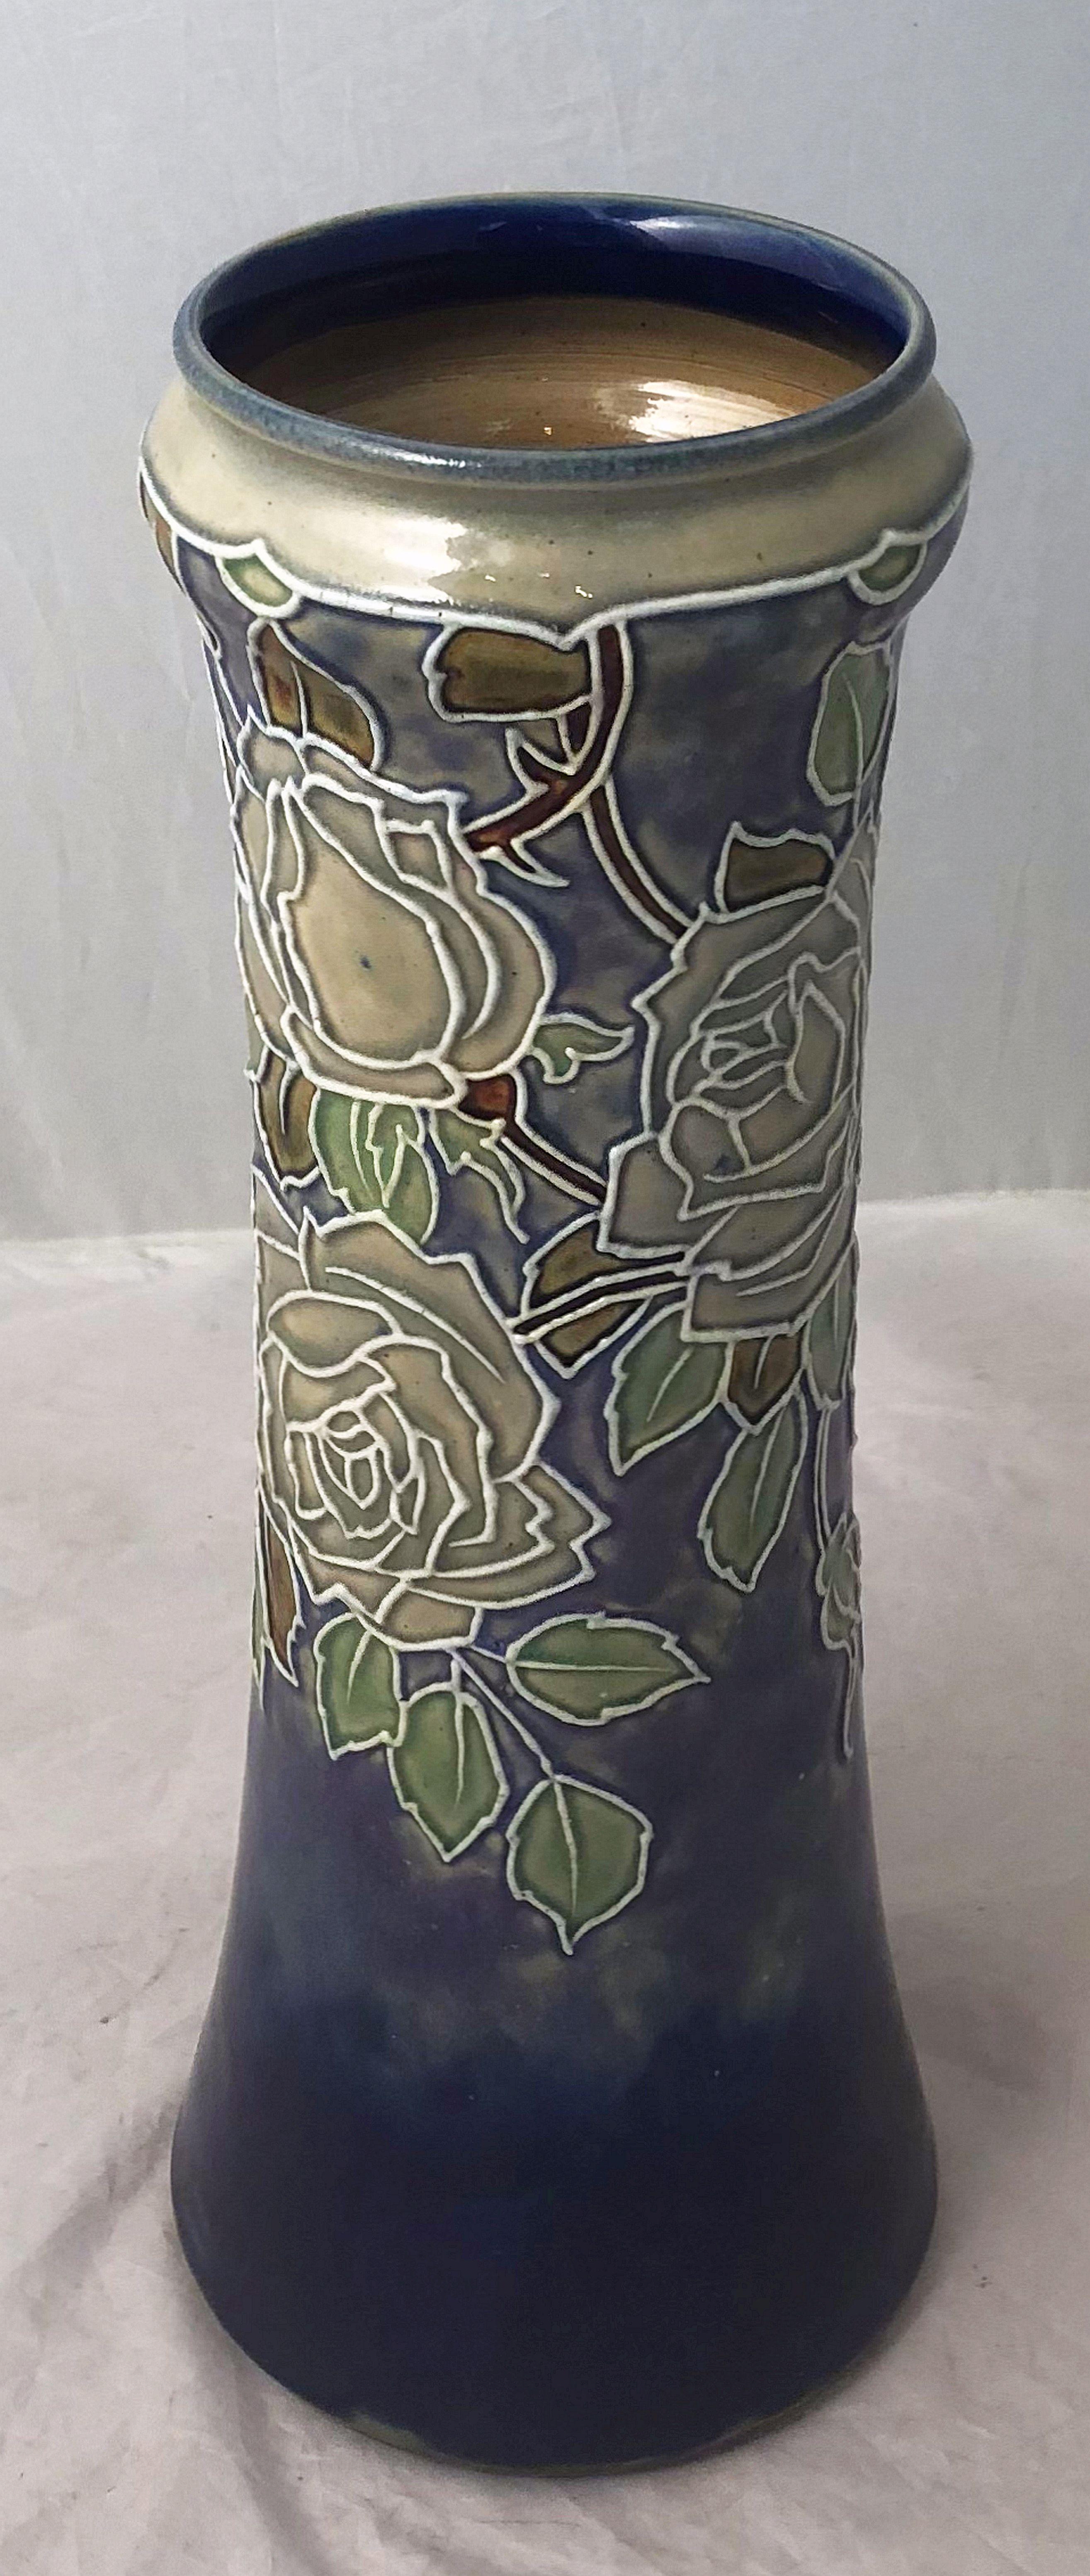 Ceramic Pair of Royal Doulton Vases from the Arts & Crafts Period, 'Priced as a Pair' For Sale